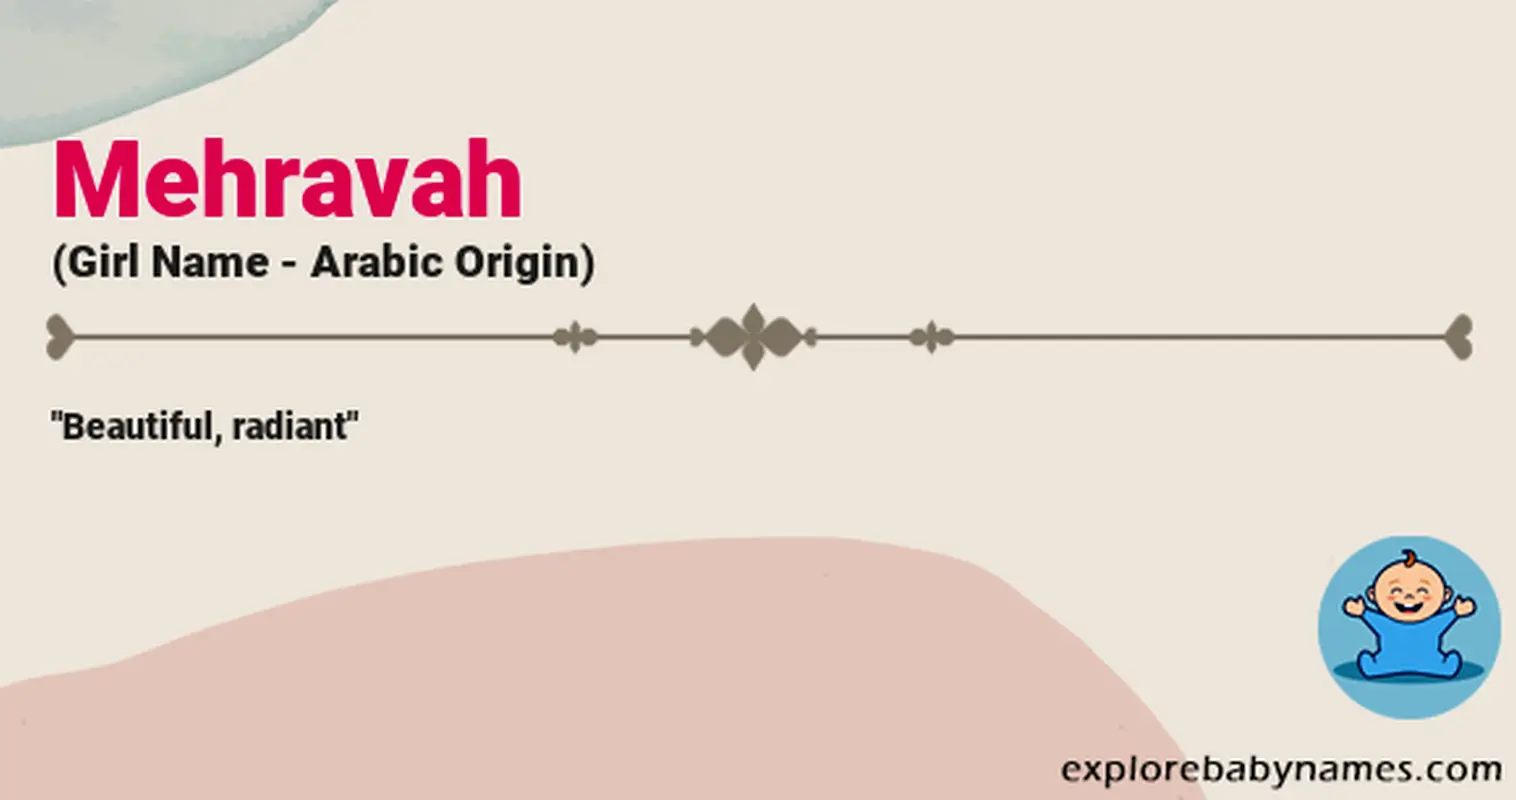 Meaning of Mehravah